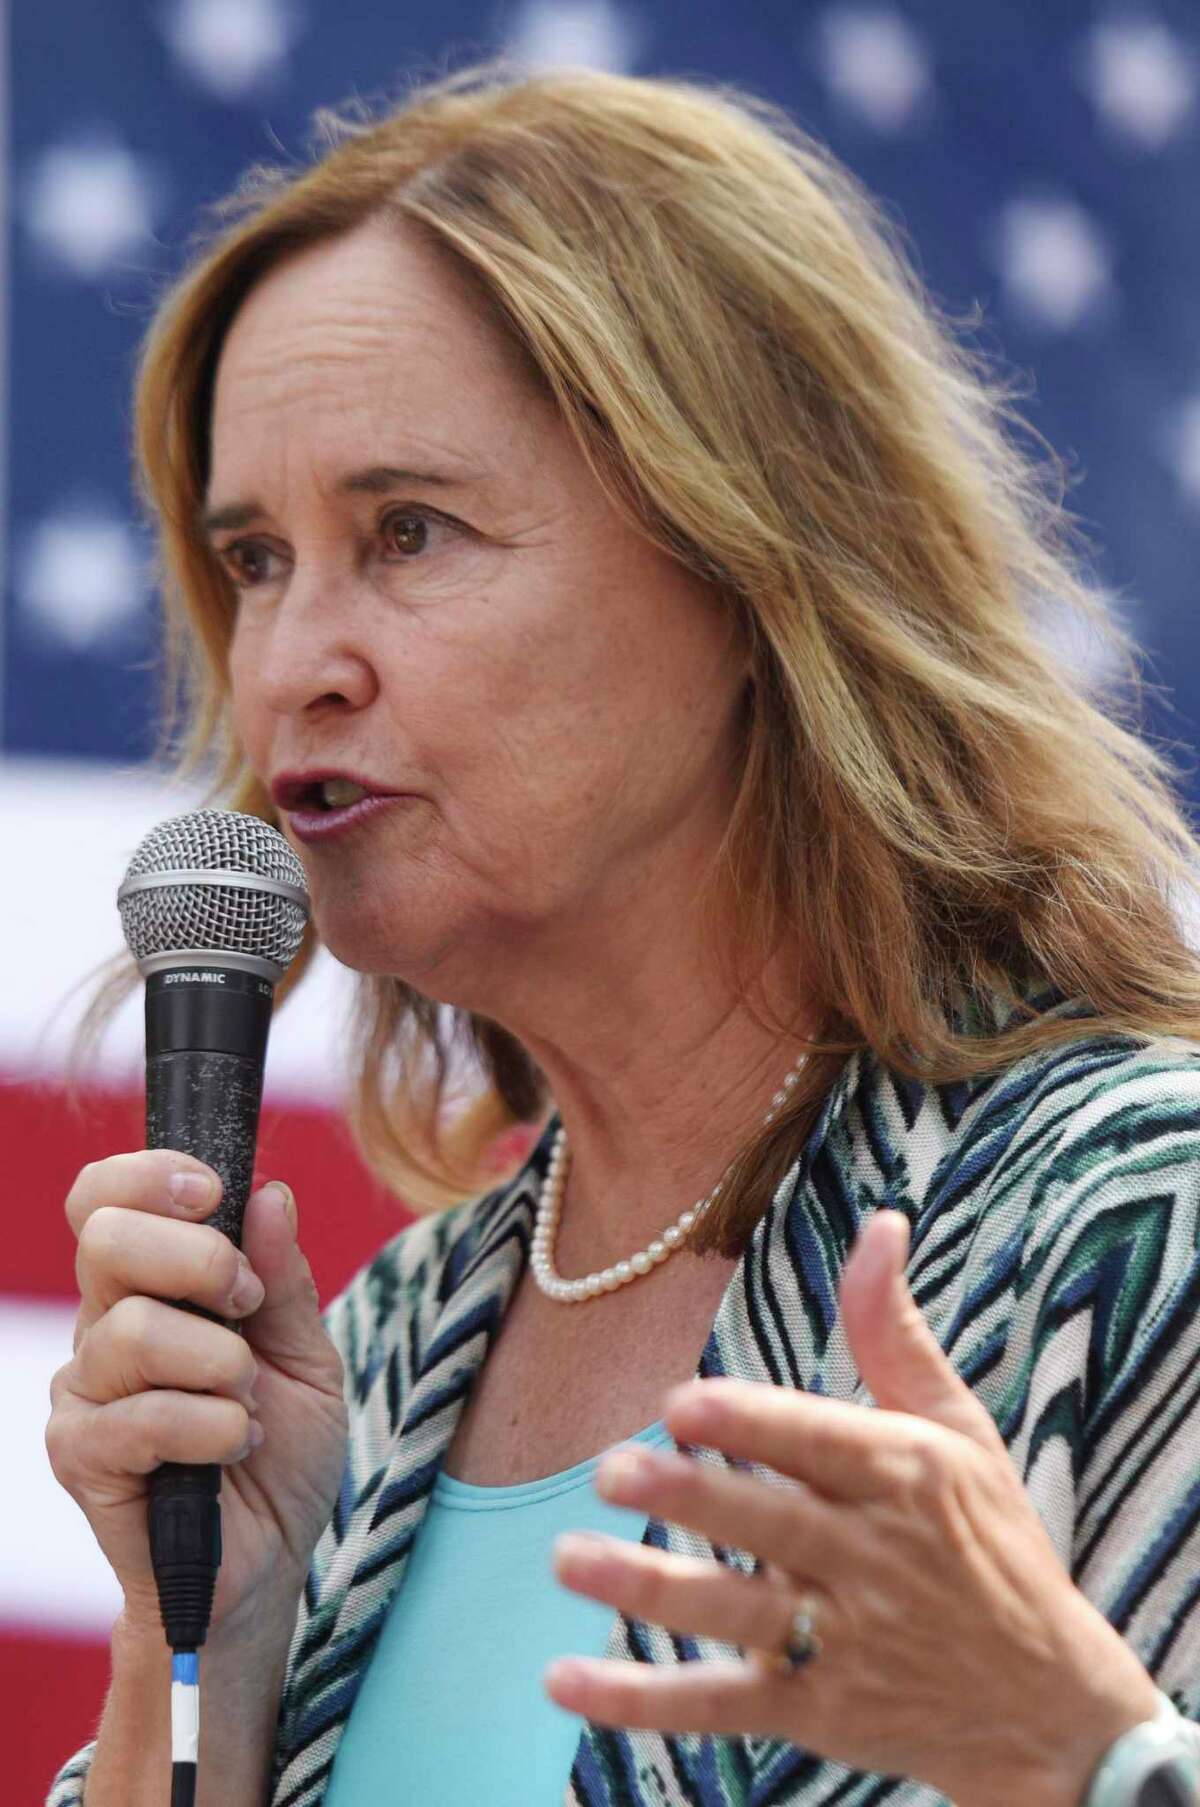 Connecticut Secretary of the State Denise Merrill speaks at the Greenwich Democrats’ annual picnic on Sept. 10, 2017. Merrill oversees election ballots and 500 different ones will be sent beginning Oct. 2 to municipalities across the state. Because of the pandemic, a record number of absentee ballots are expected.